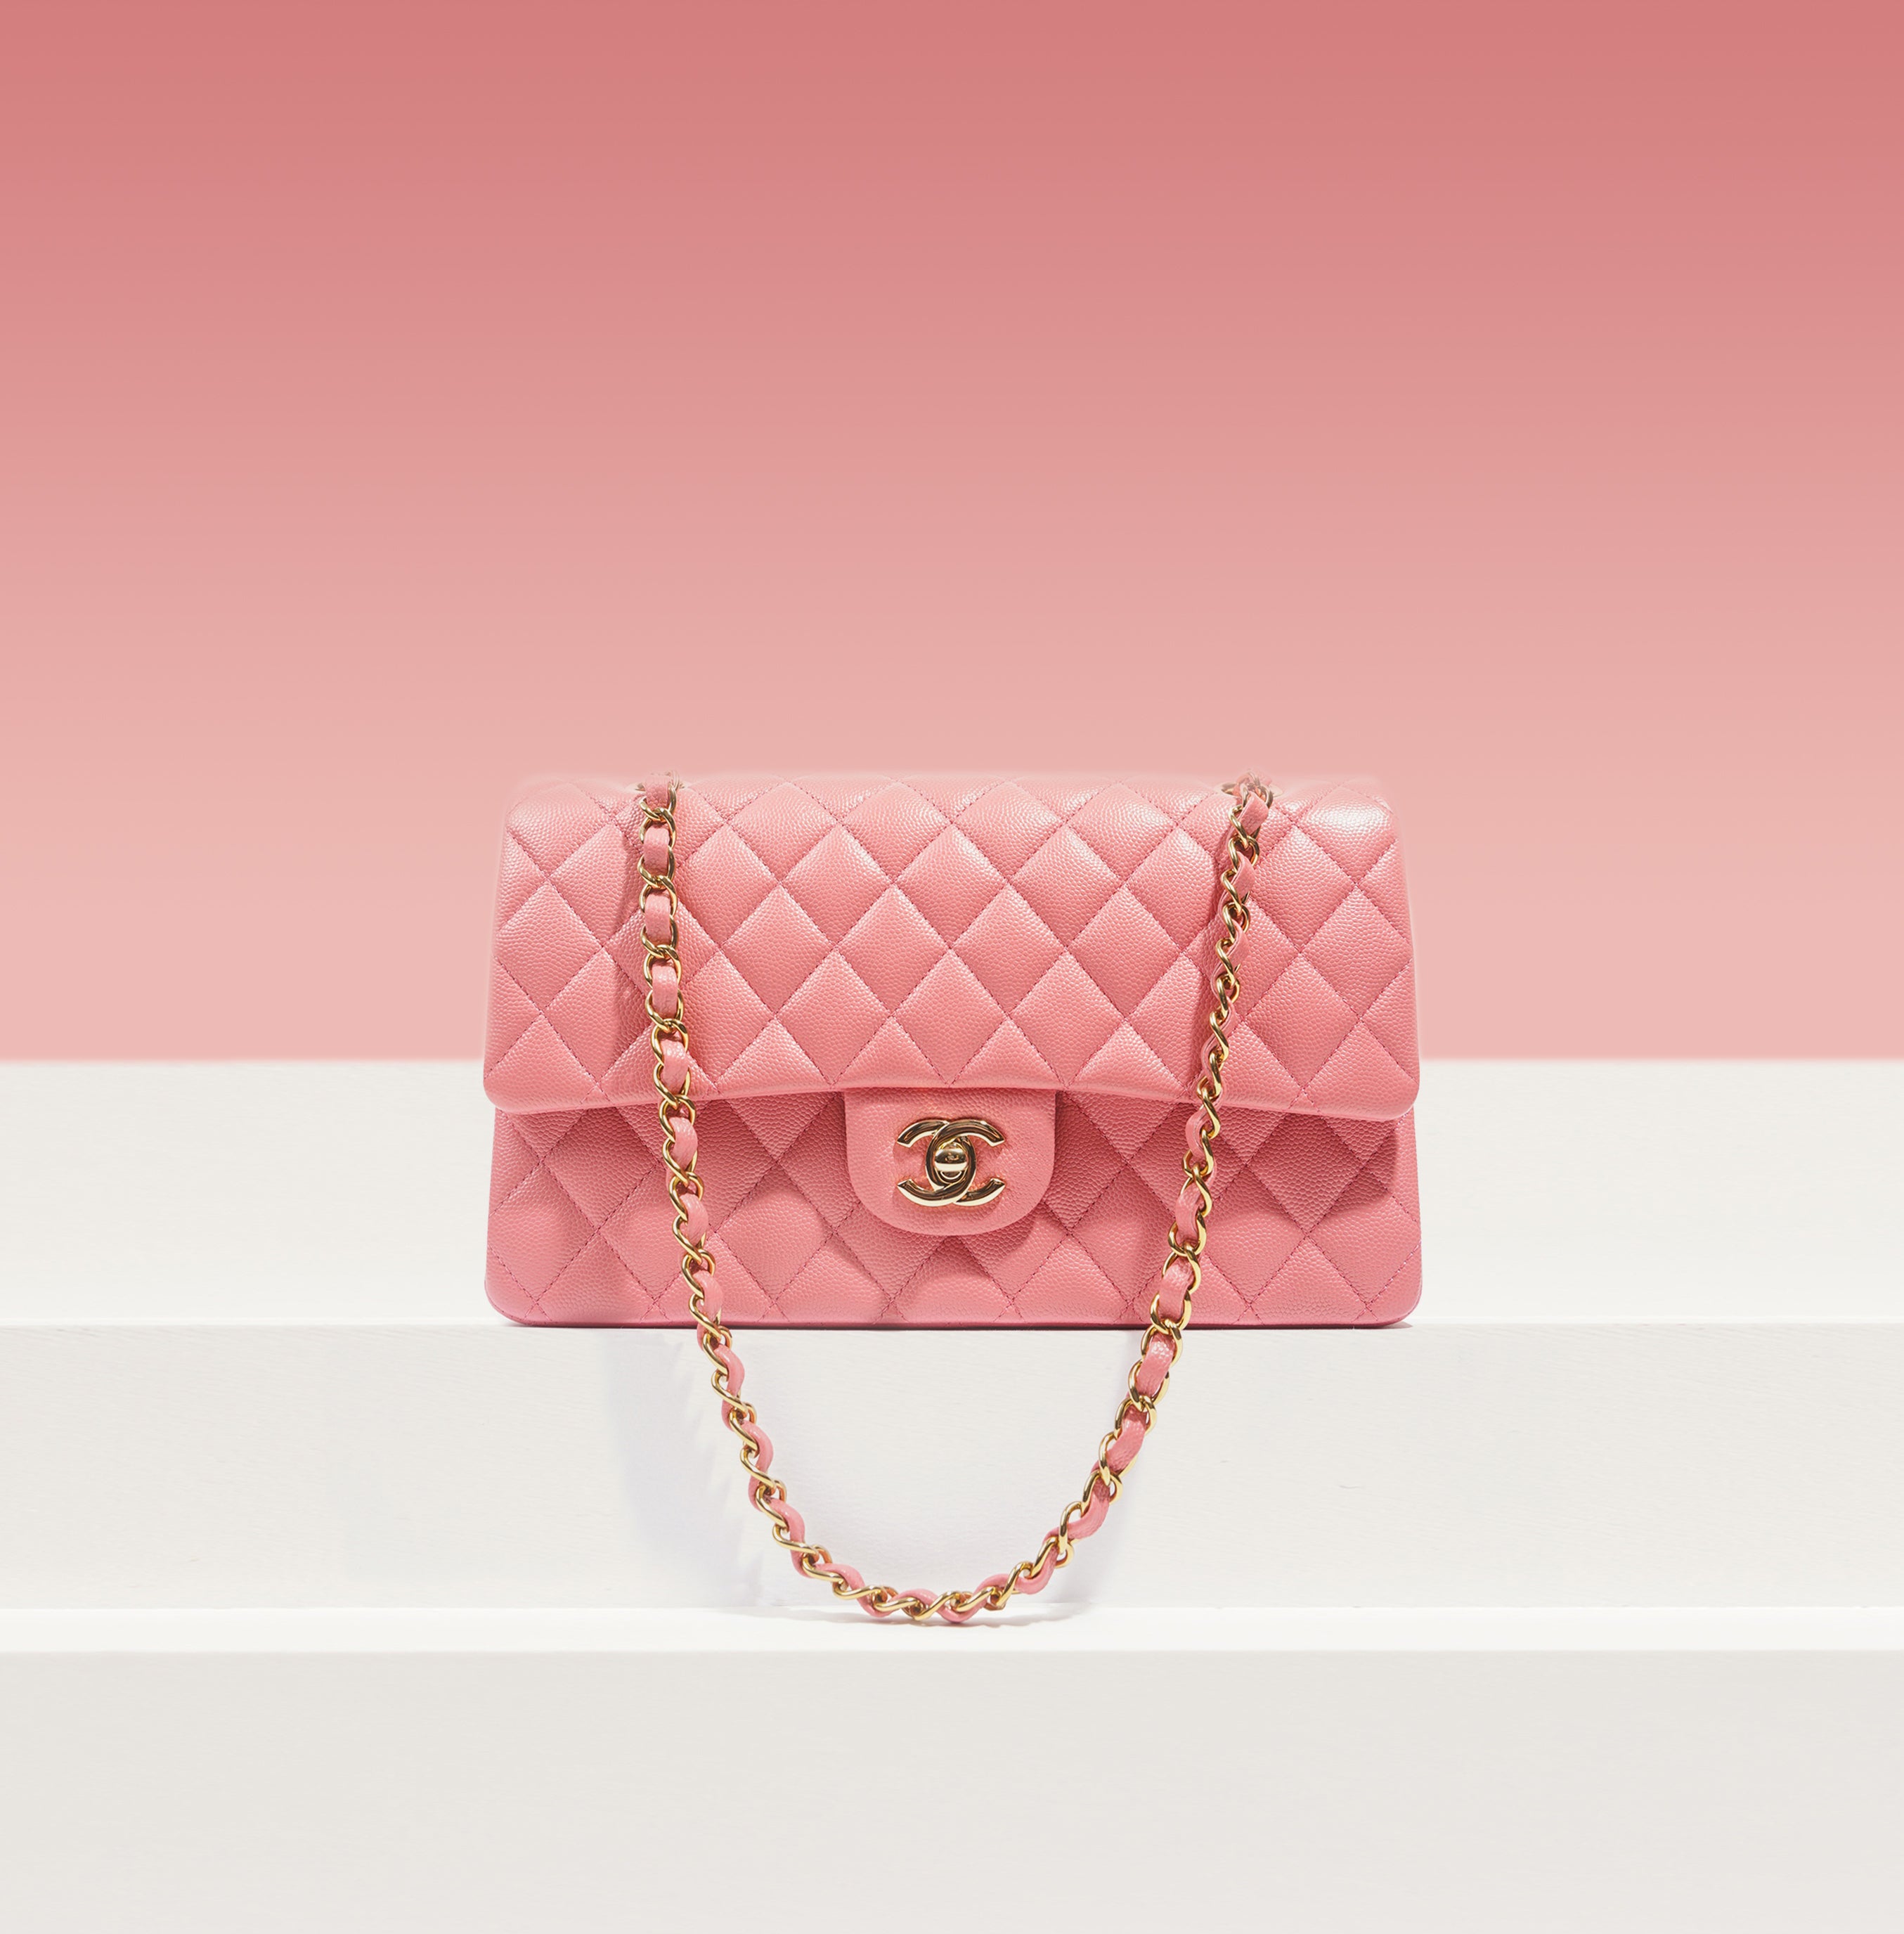 5 Tips To Clean and Care For Your Lambskin Chanel Flap Bag - The